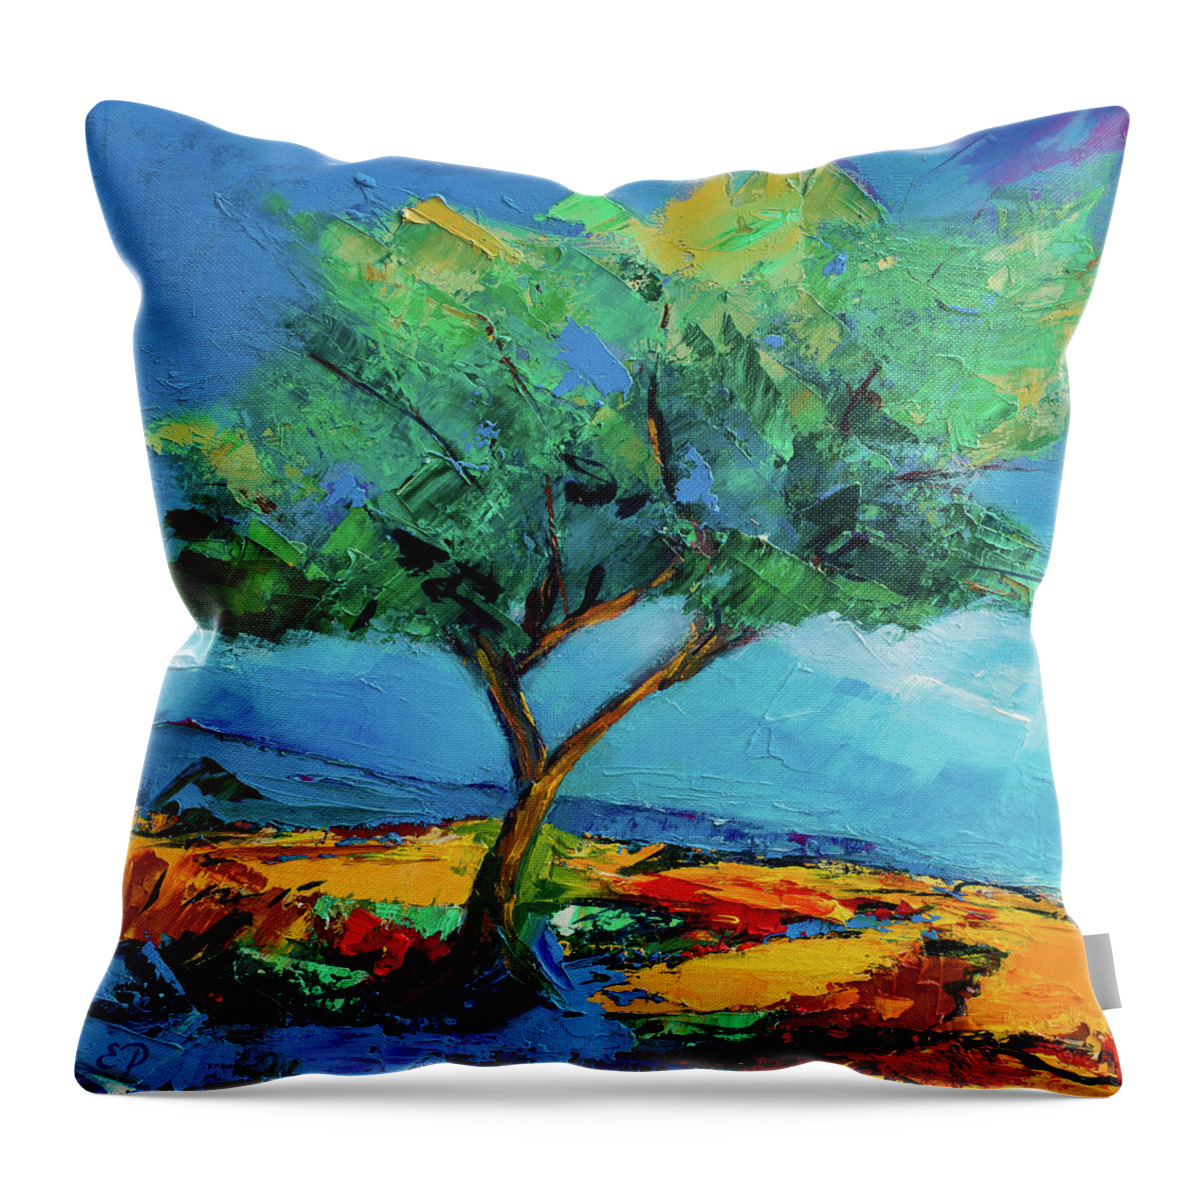 Landscape Throw Pillow featuring the painting Lonely Olive Tree by Elise Palmigiani